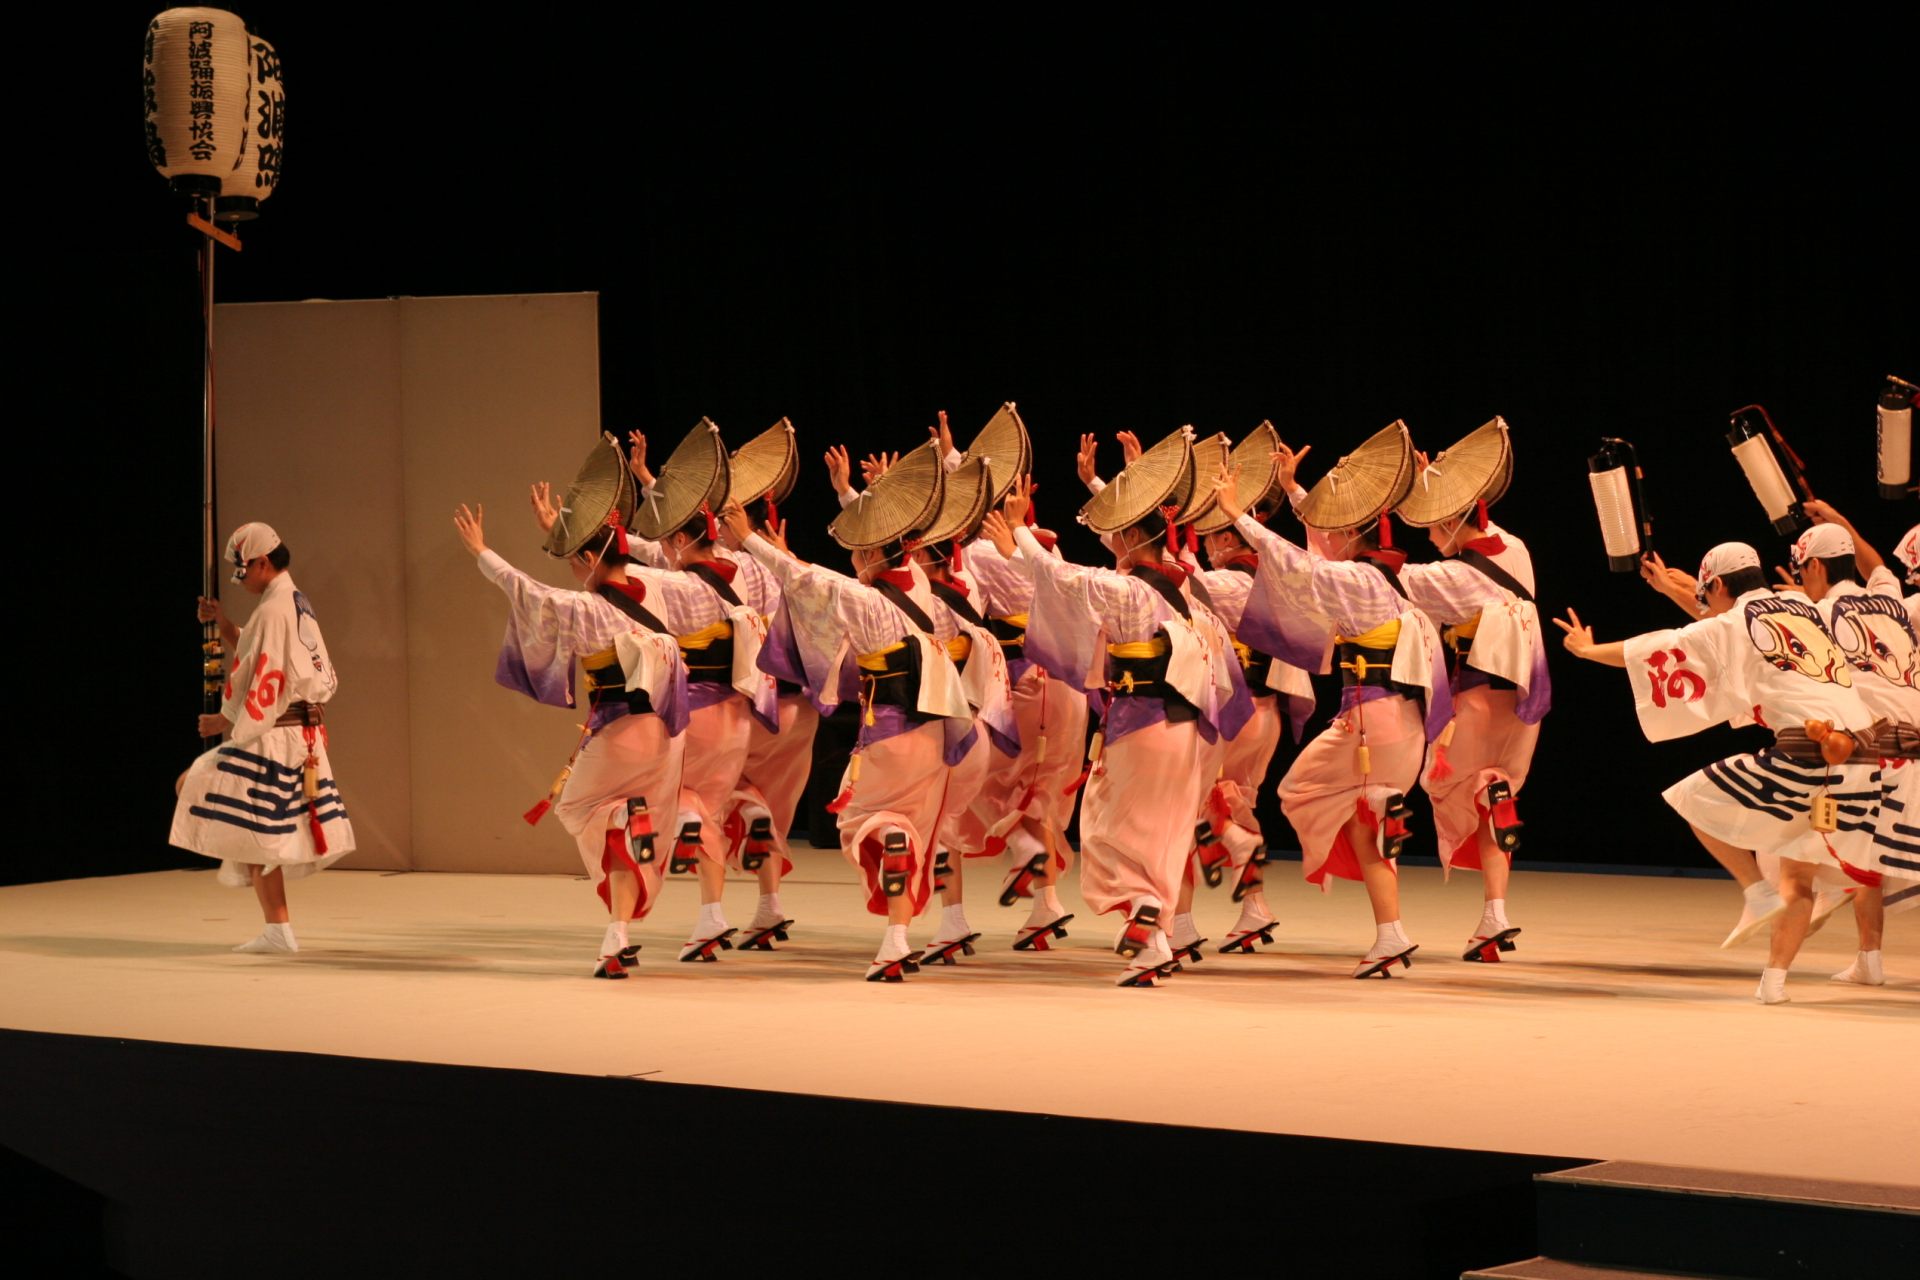 The Awa Odori dance is performed year round at the Awaodori Kaikan hall. Come experience the proud traditions of Tokushima as they unfold before your very eyes.